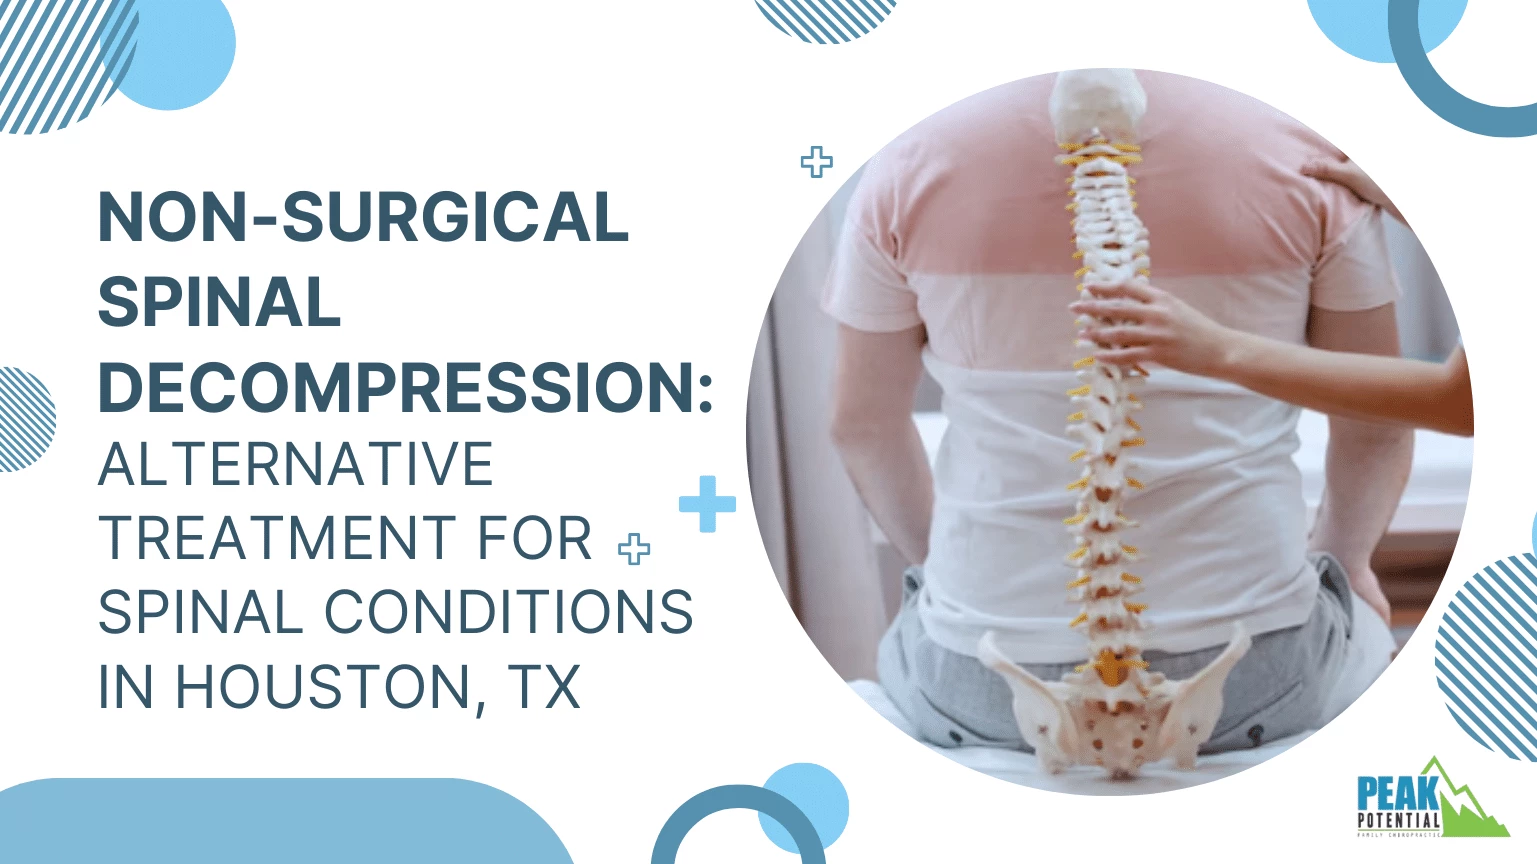 Non-Surgical Spinal Decompression Alternative Treatment for Spinal Conditions in Houston, TX